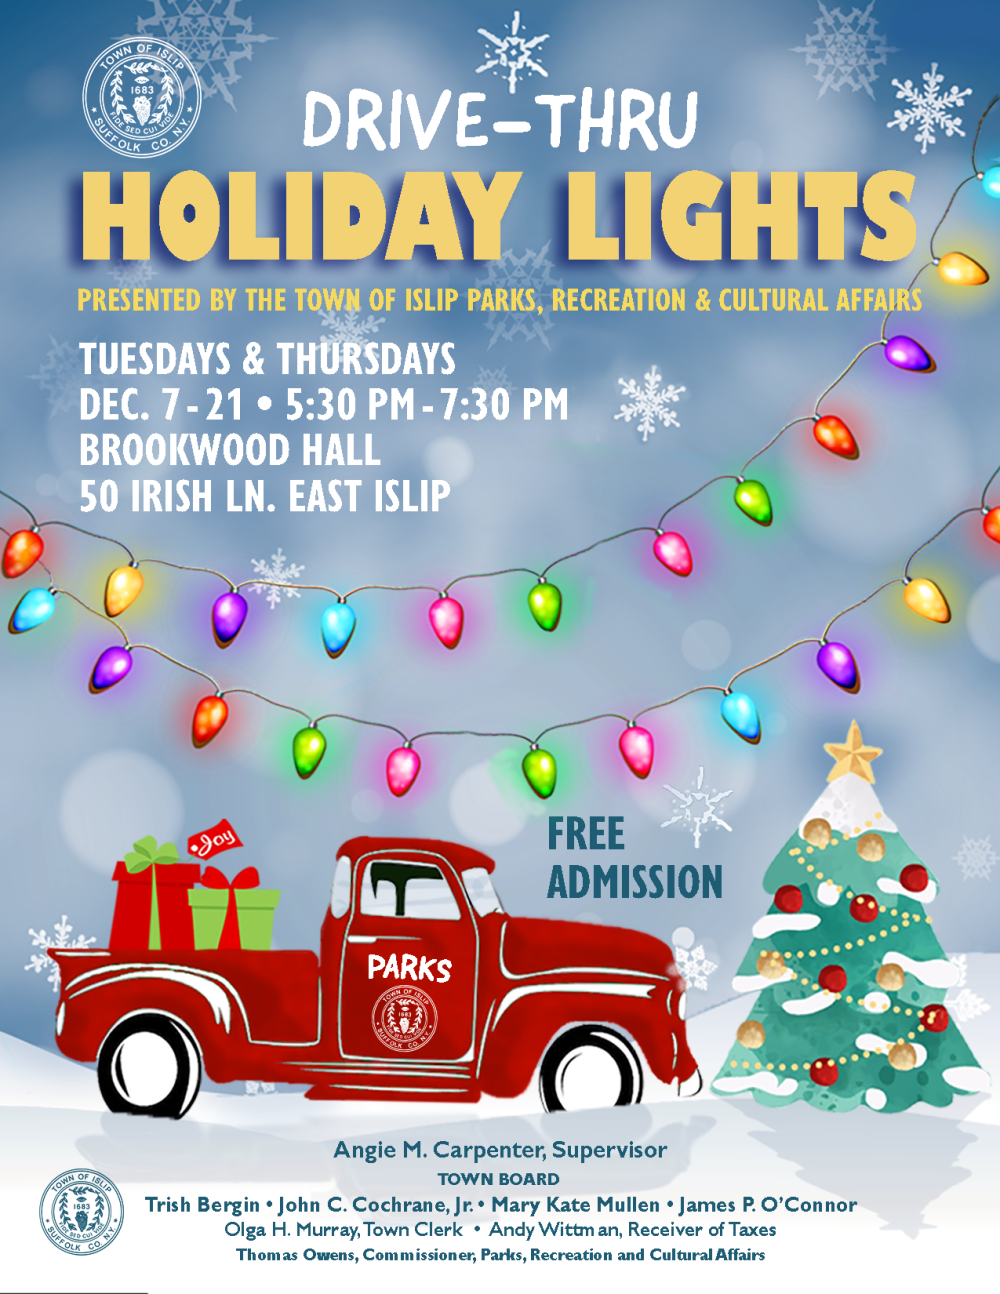 Tuesdays and Thursdays from 5:30-7:30pm, Flyer with Christmas lights red truck and Christmas tree